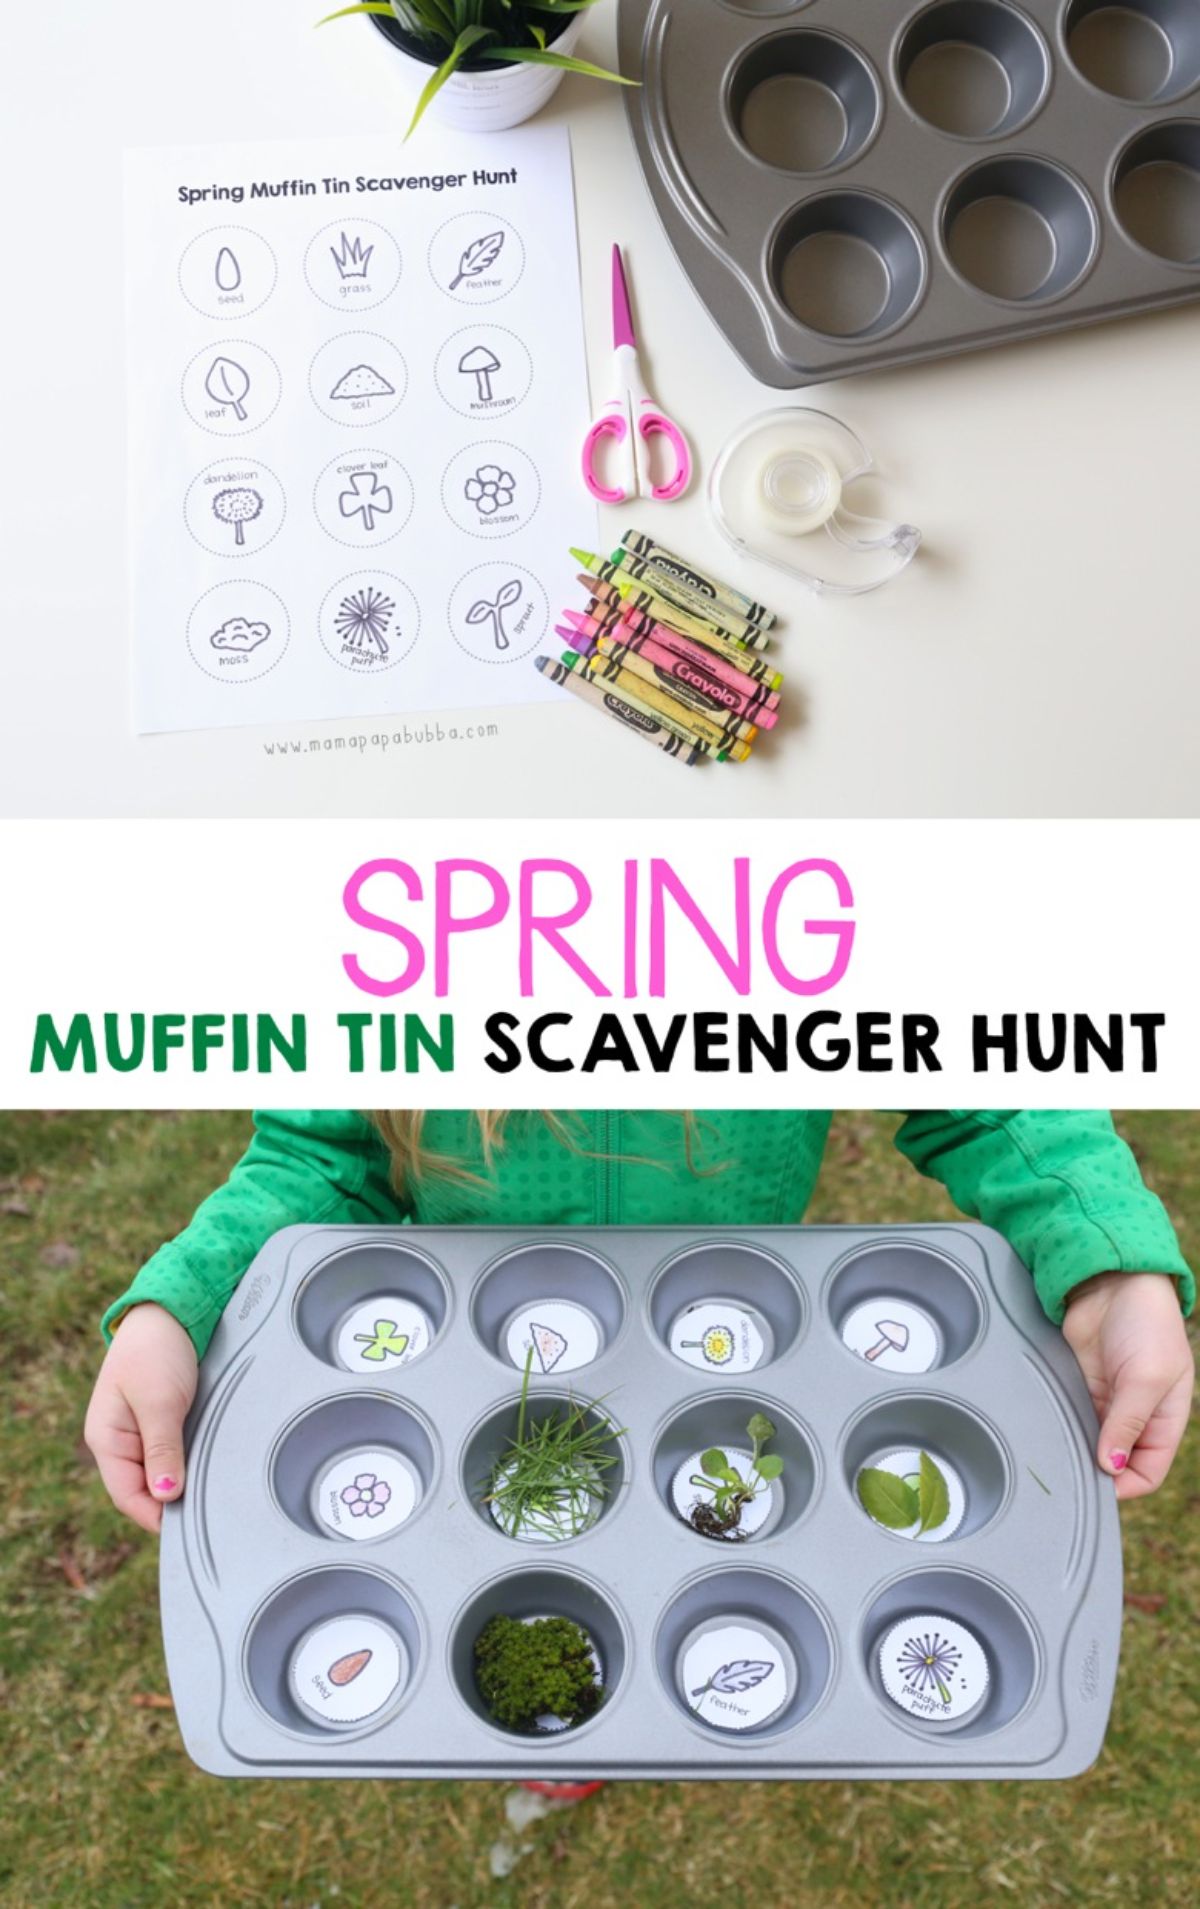 Text reads "Spring Muffin tin scavenger hunt" The top image is of a muffin tin, a sheet of paper with images on it, a pair of scissors, a pile of wax crayons and some tape. The bottom image is a child ni a green shirt holding the muffin tin filled with items.